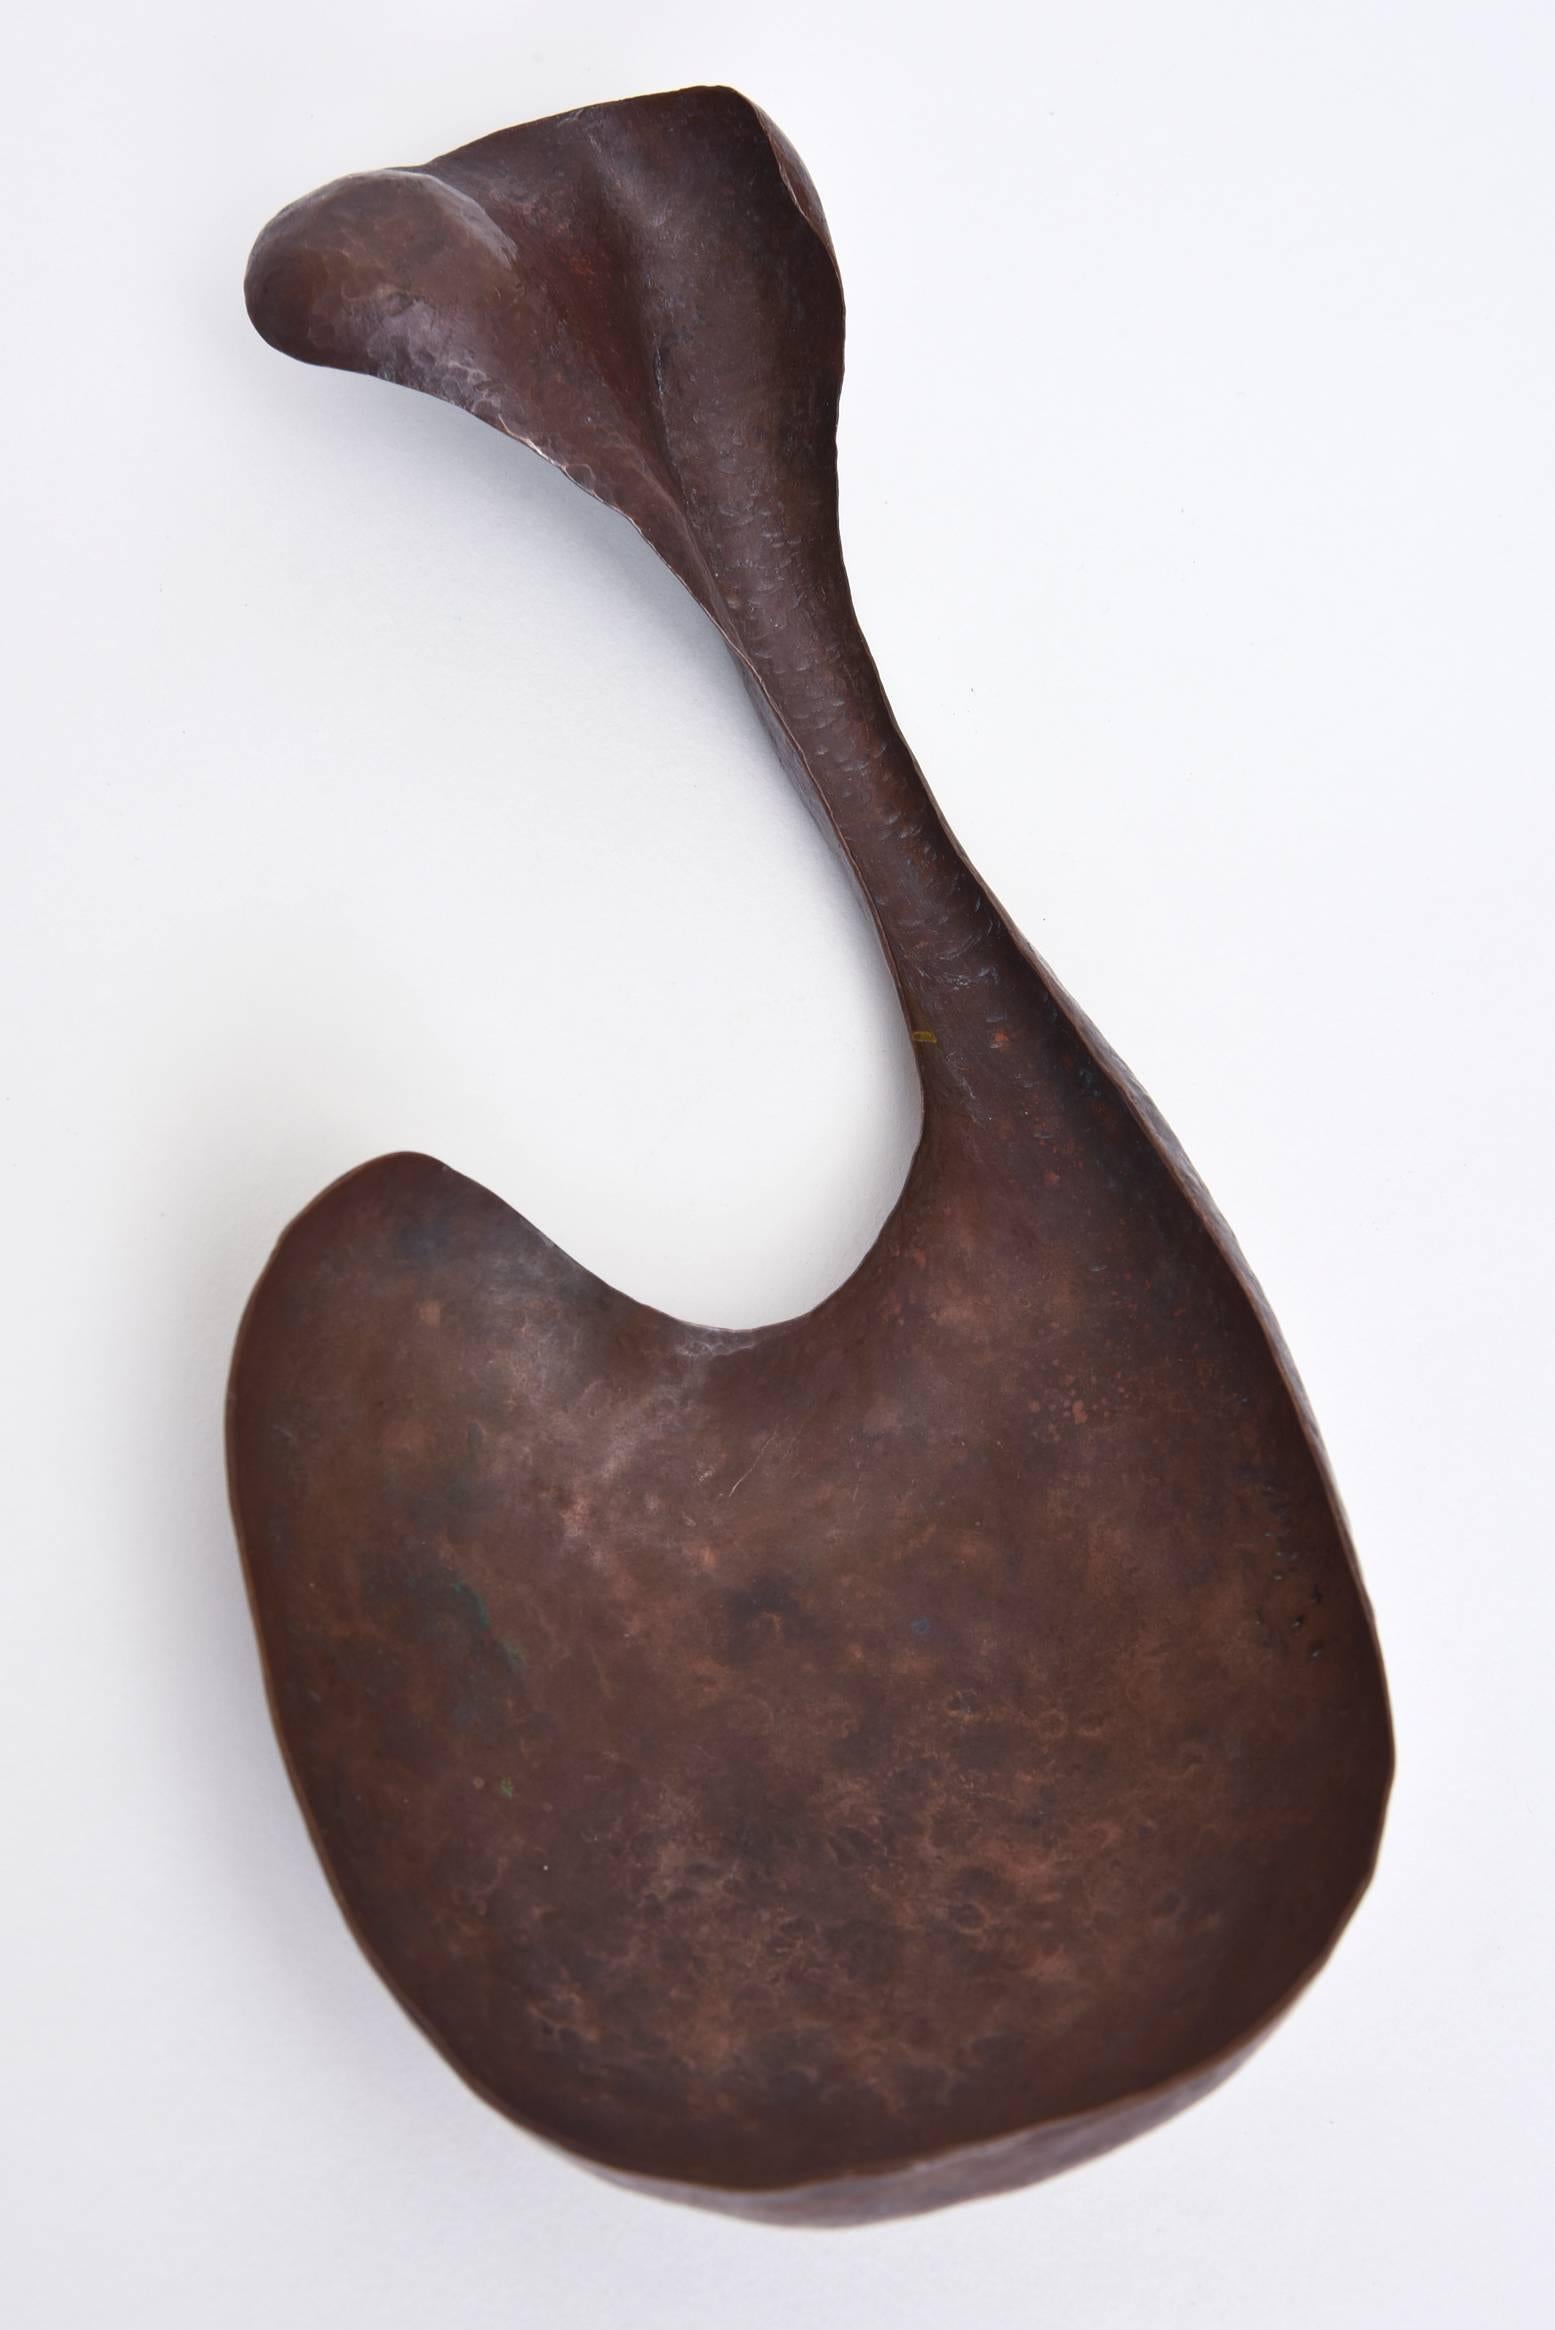 Jean Arp Inspired Hand-Hammered Patinated Bio-Morphic Sculpture/Object 1